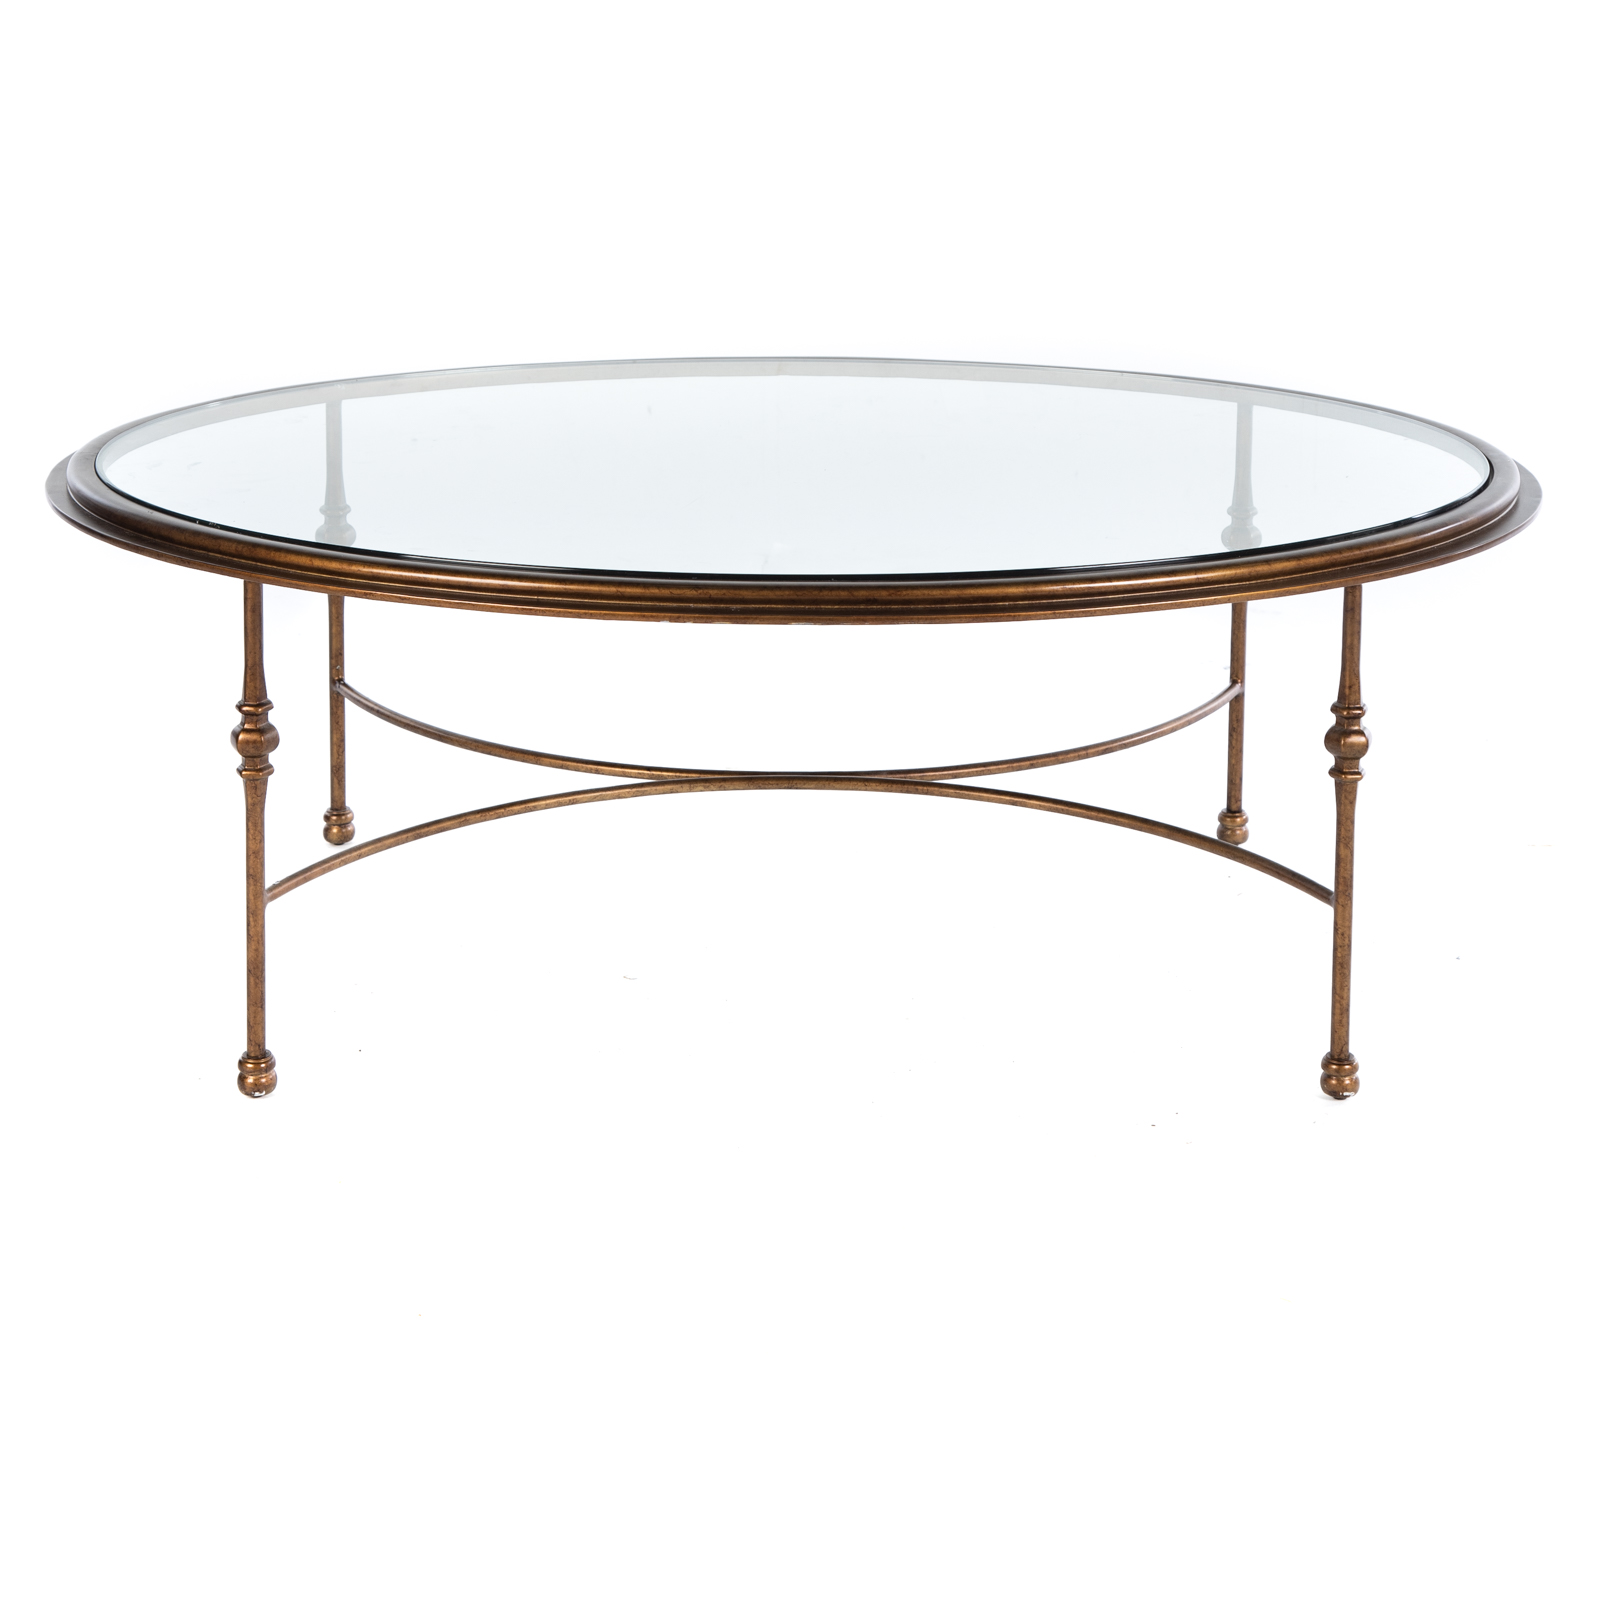 CONTEMPORARY OVAL GLASS TOP COFFEE 2886a8